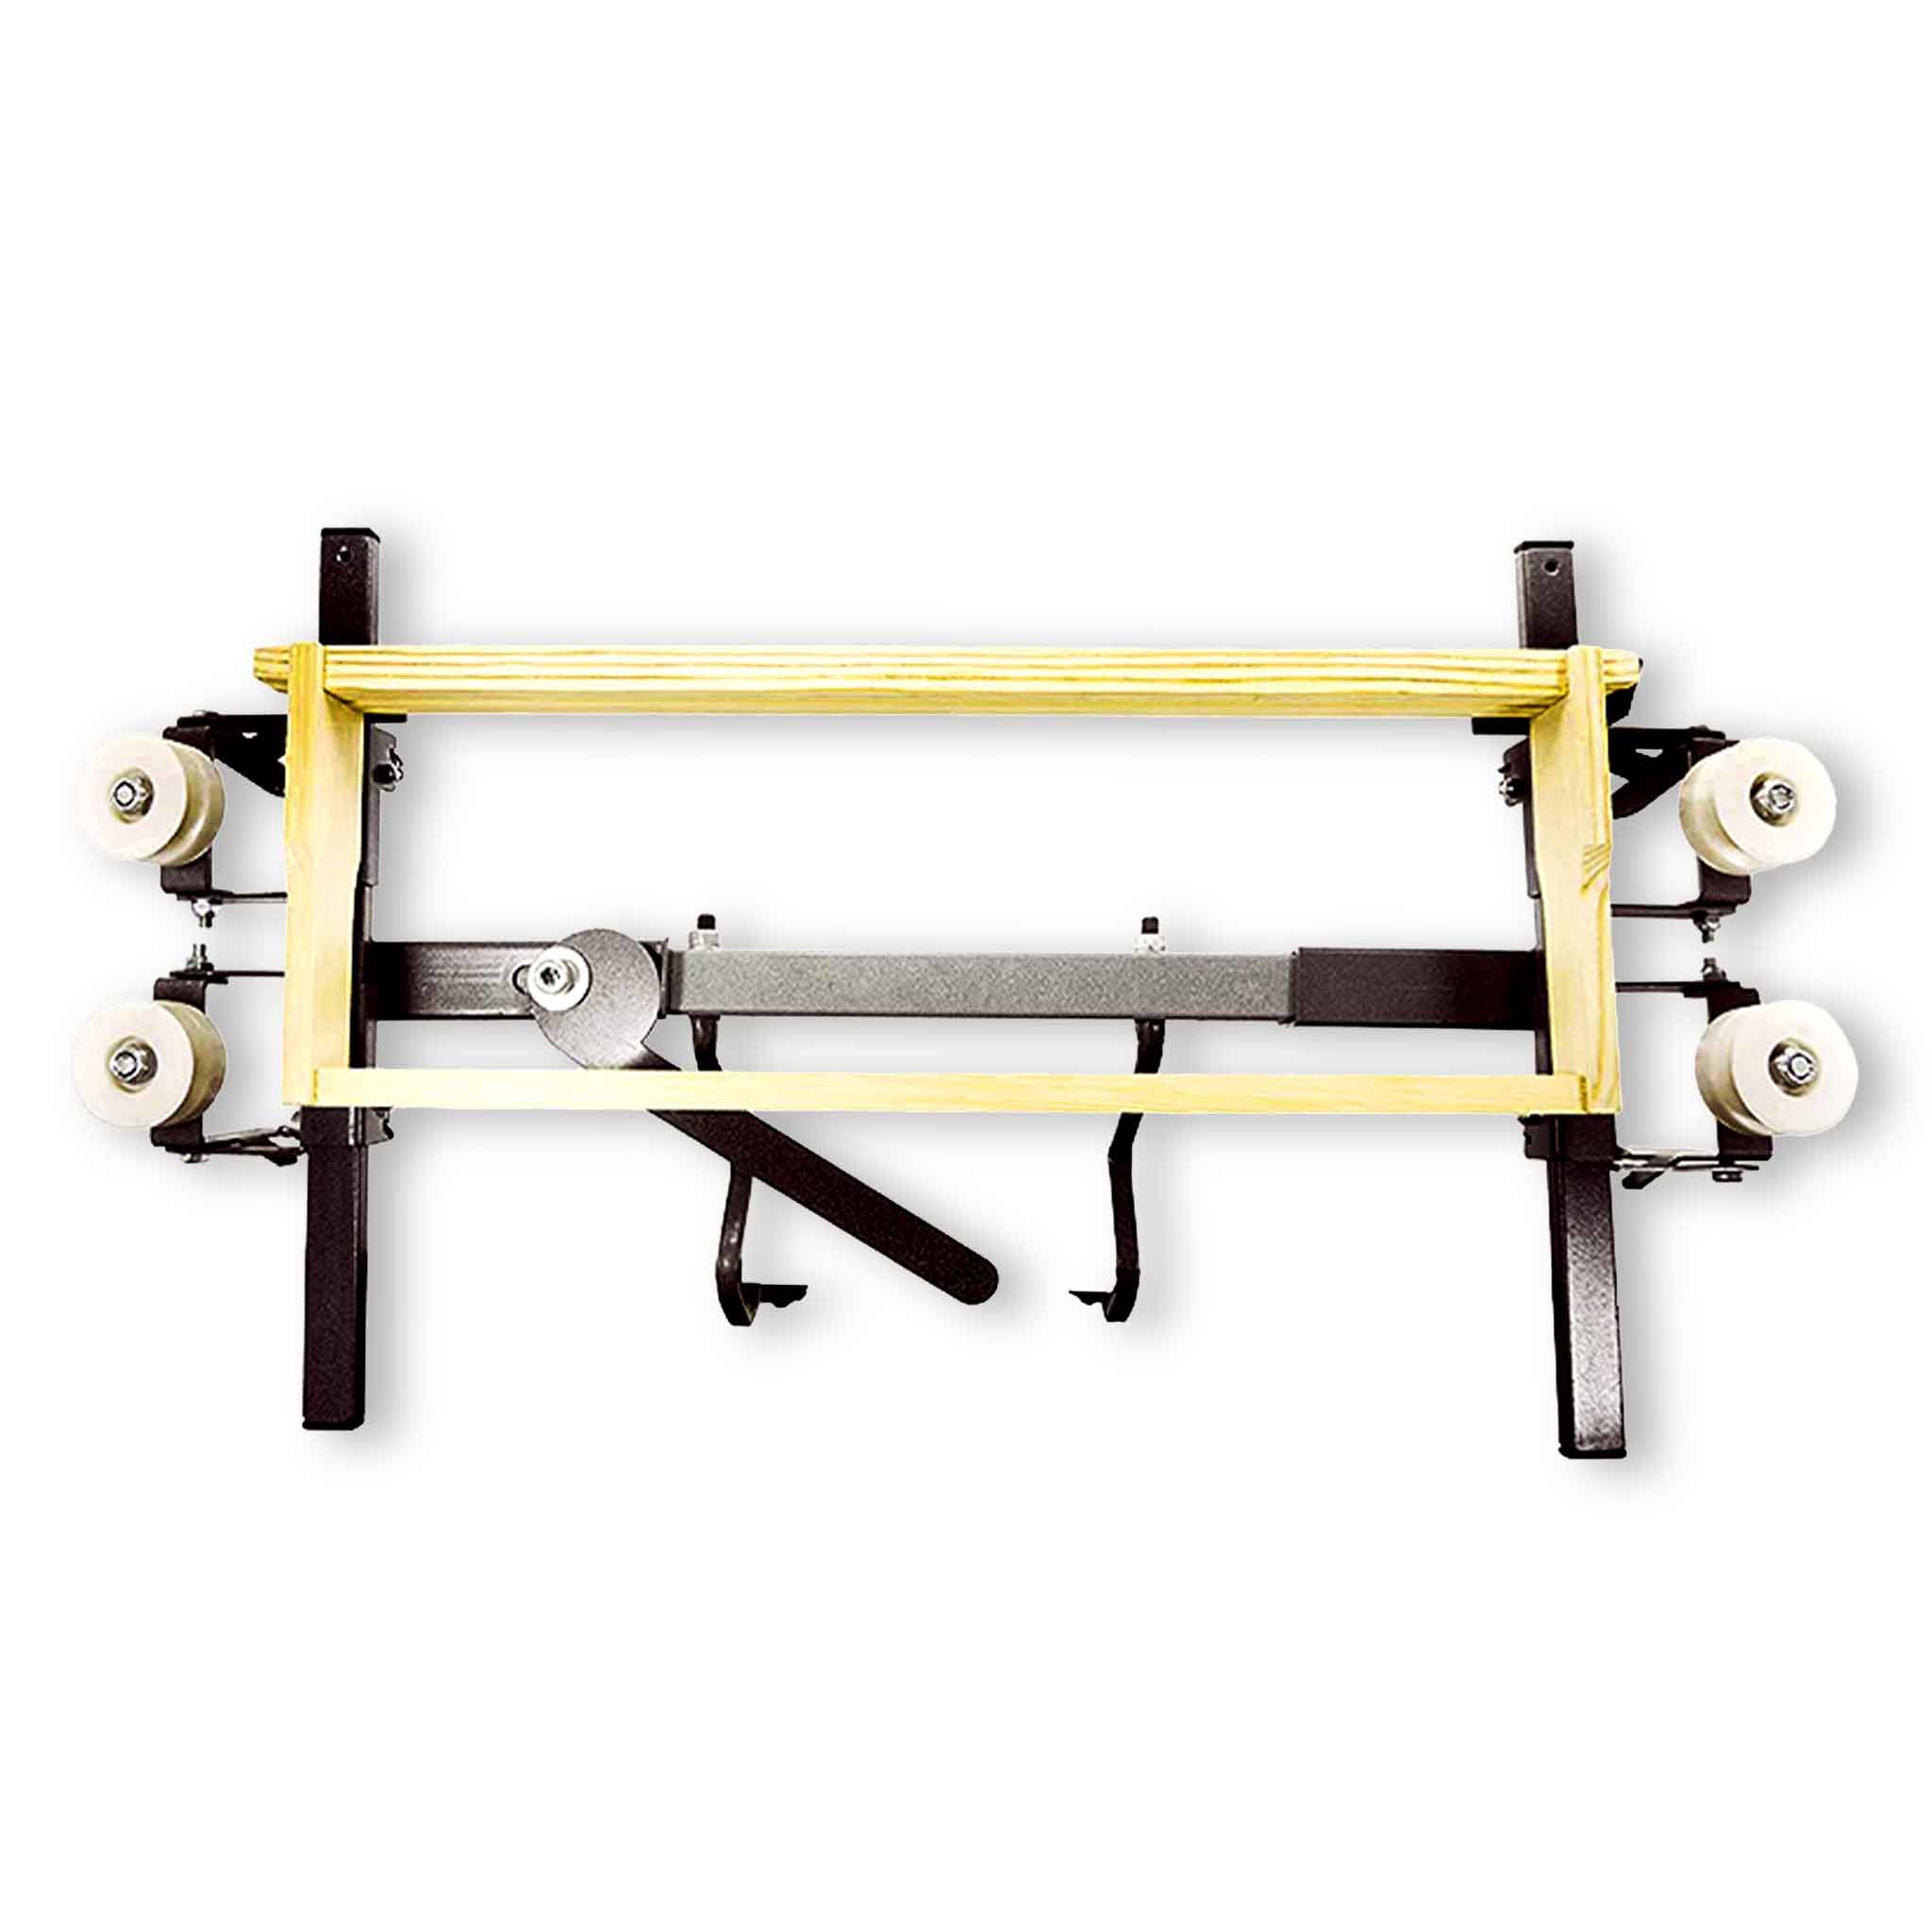 Premium Frame Wiring Assembly Jig Tool - Tools collection by Buzzbee Beekeeping Supplies